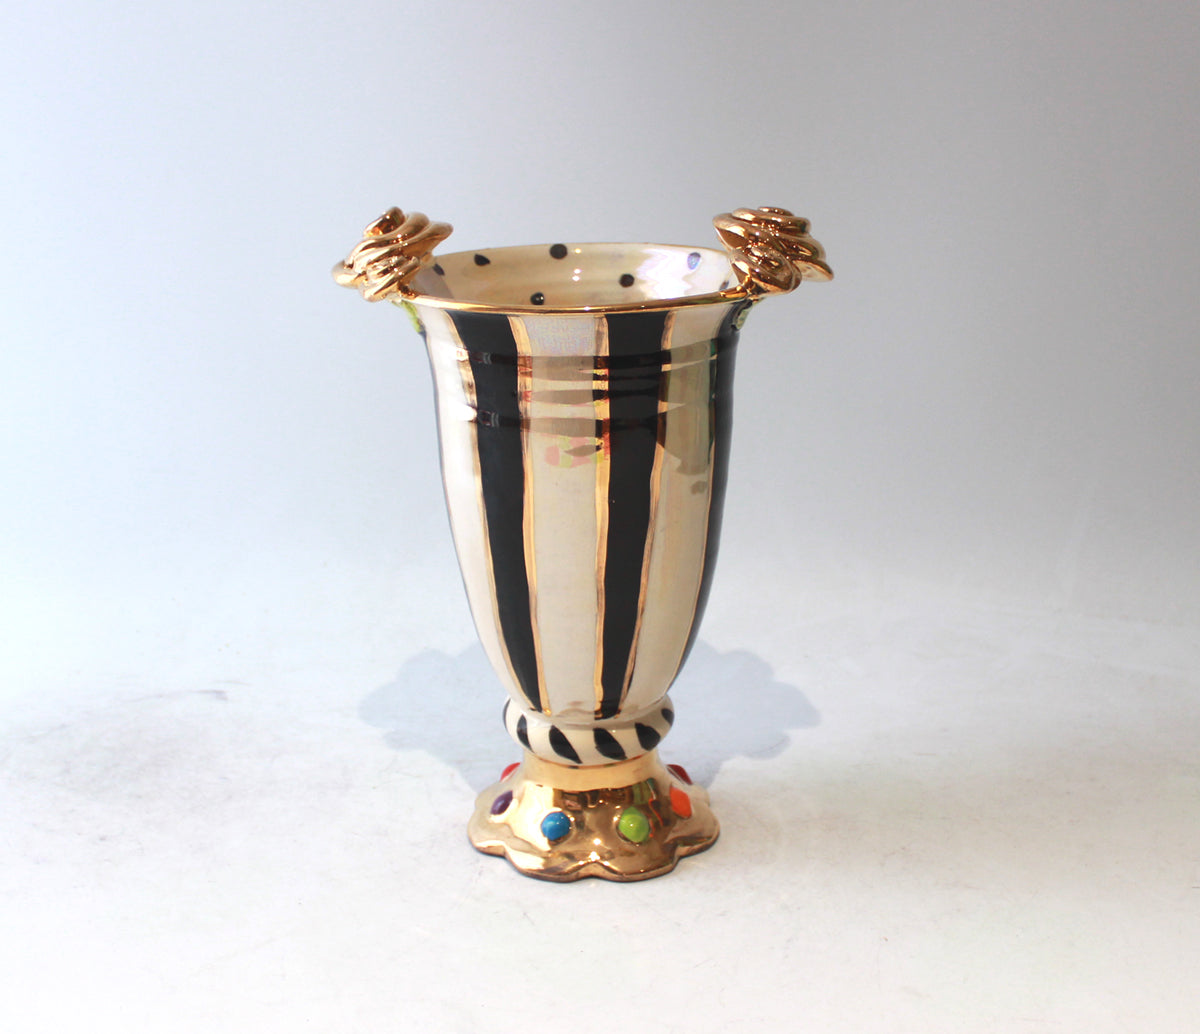 Rose Edged Crown Footed Vase in Black and White Stripe